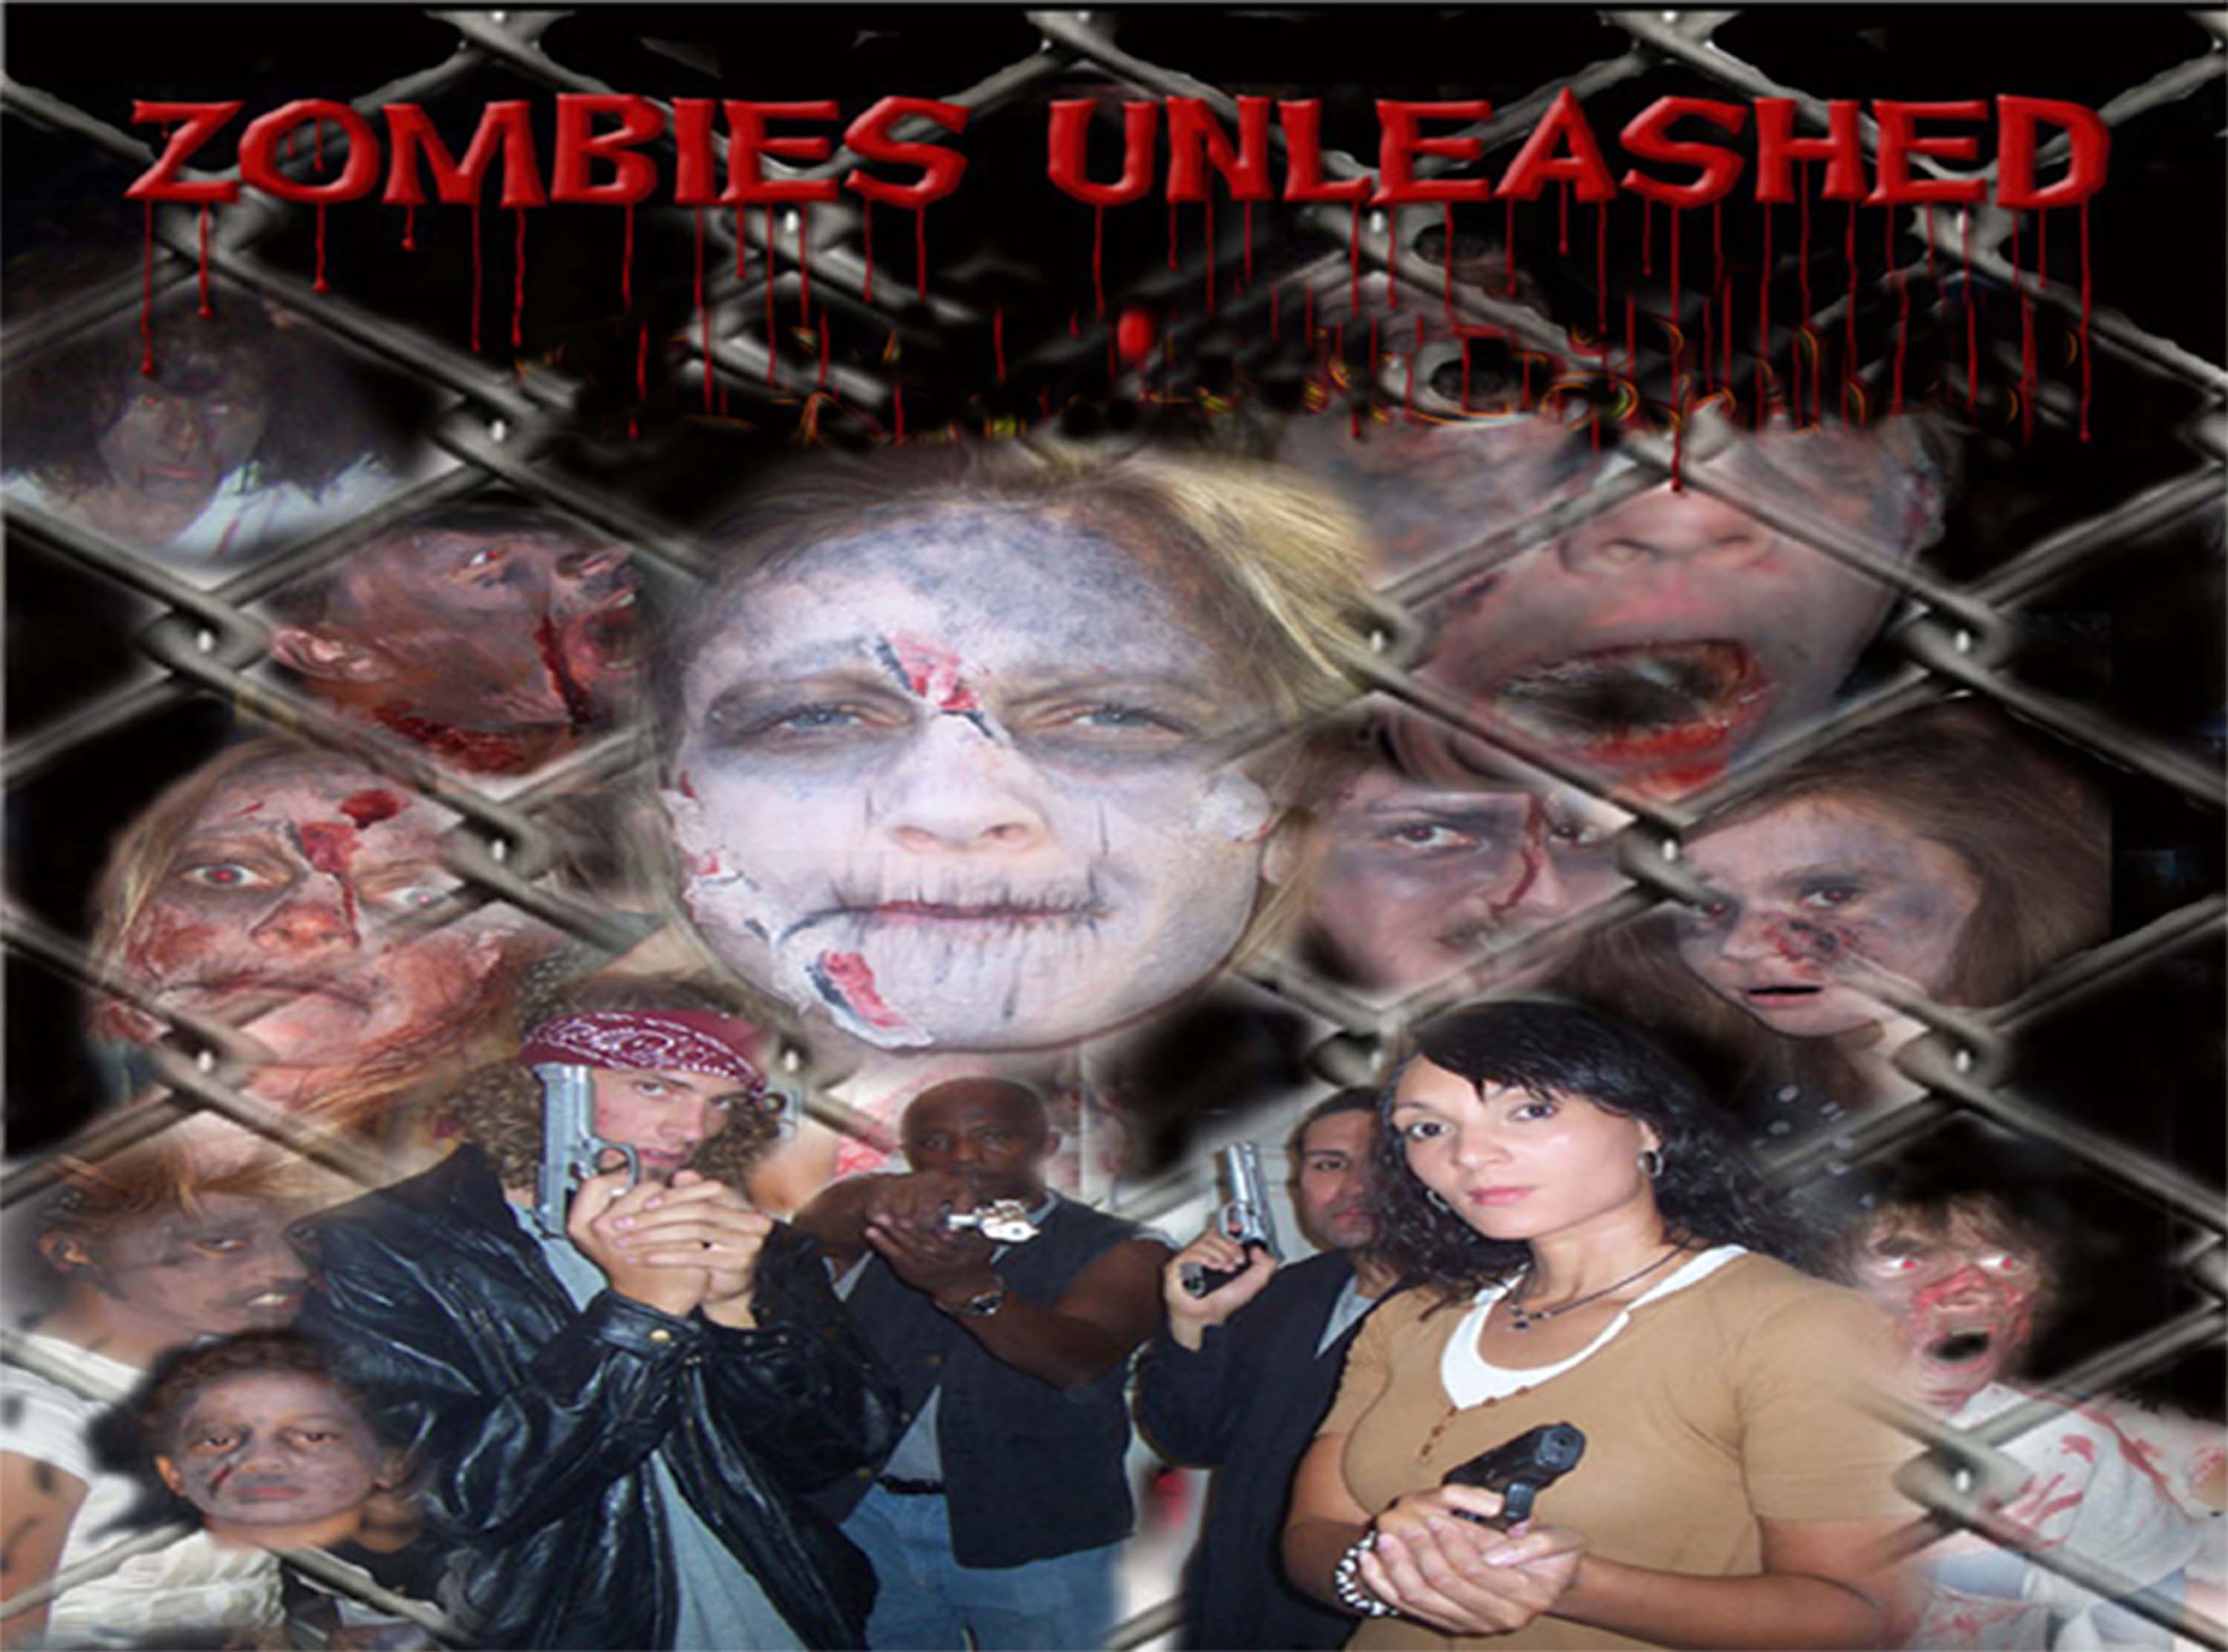 Zombies Unleashed a Richard Lee Givens film